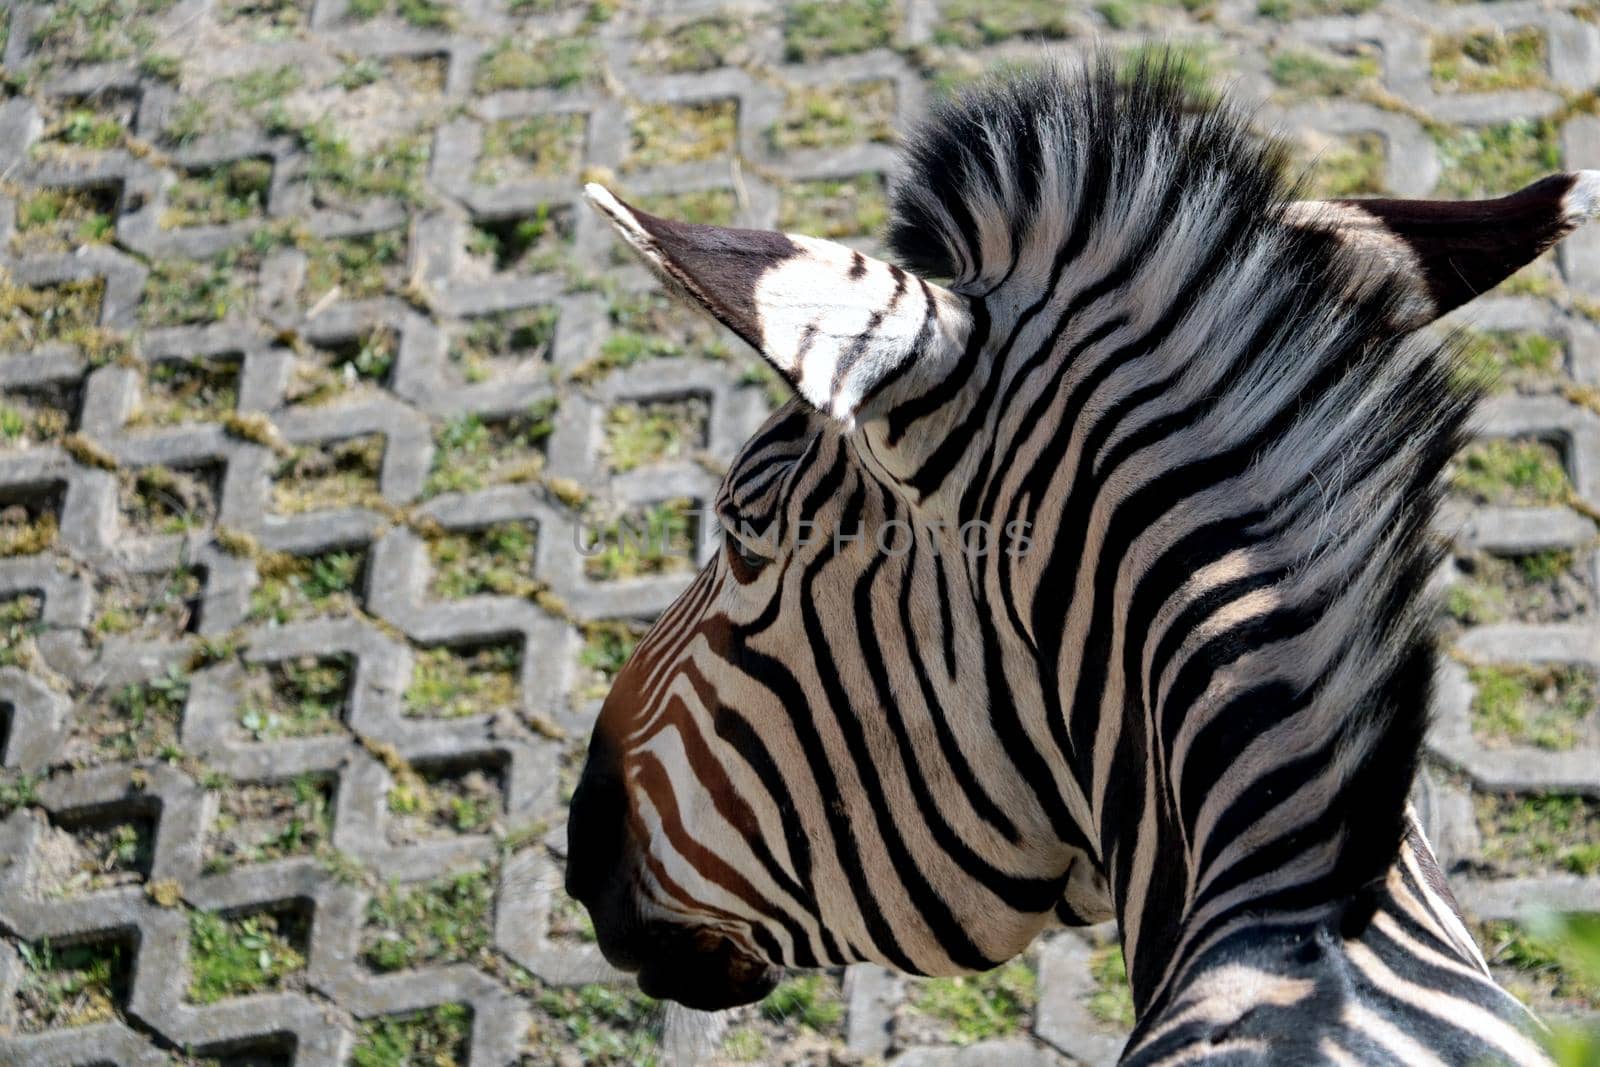 Close-up of a zebra's head in the park